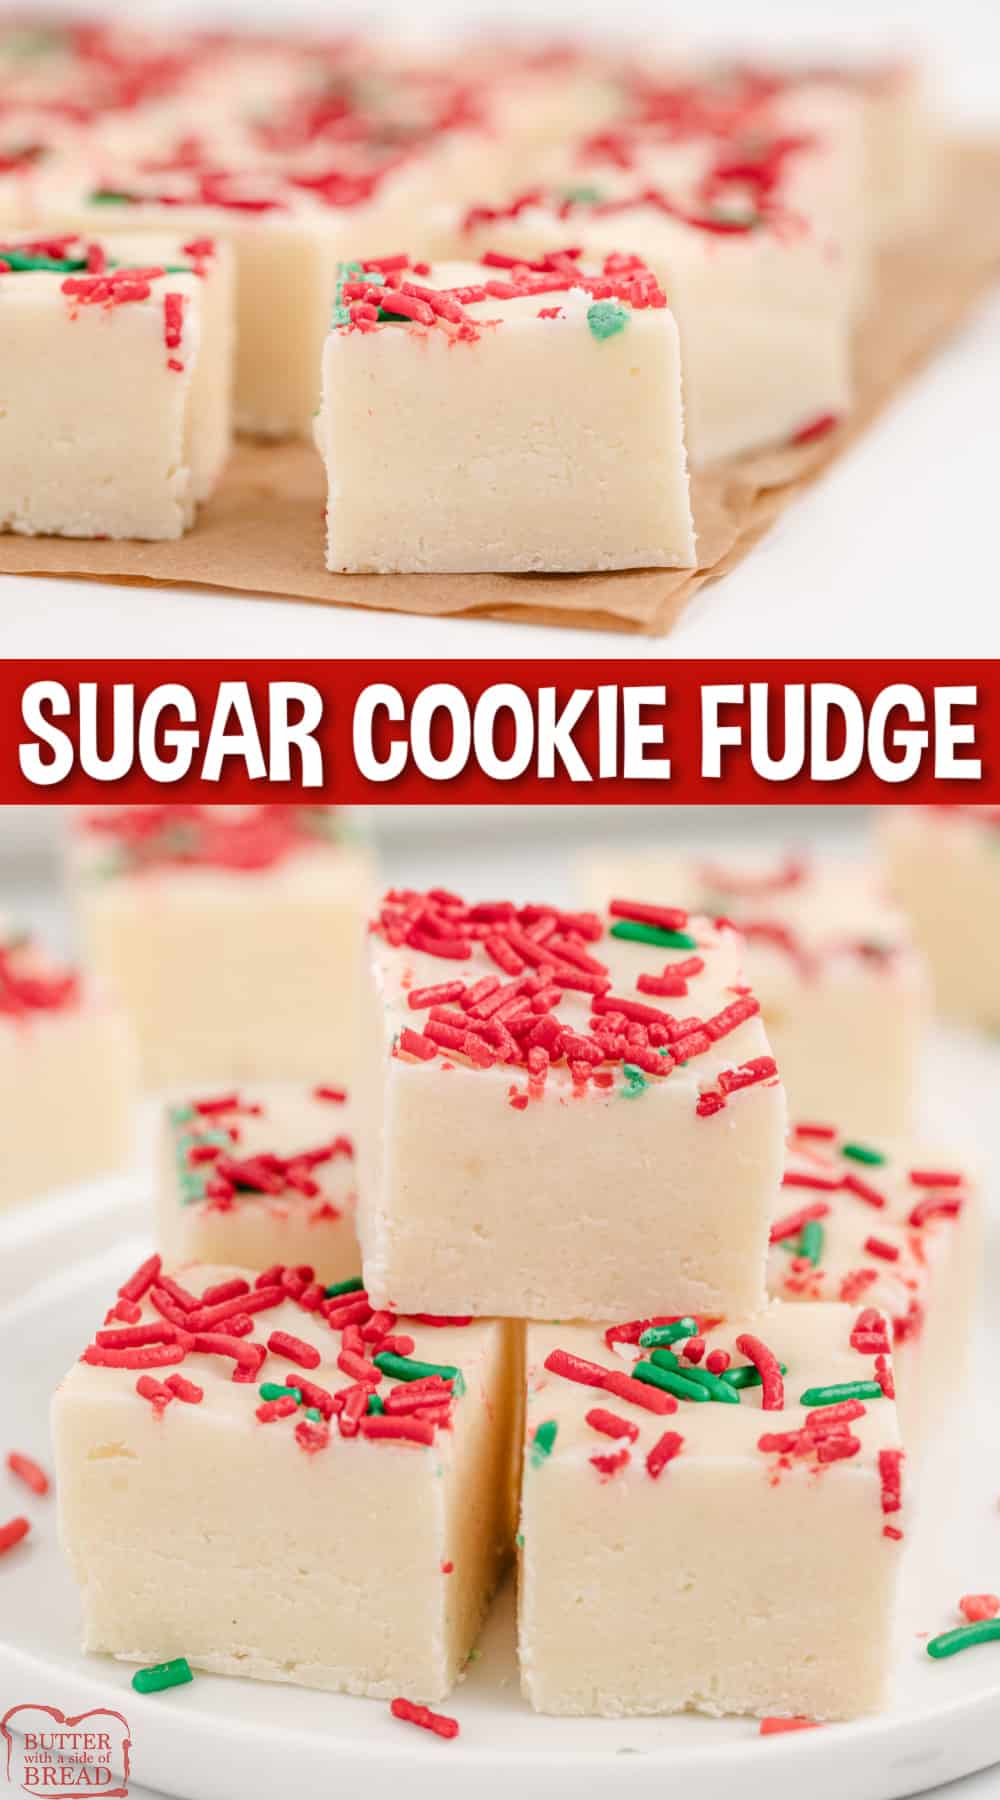 Sugar Cookie Fudge is rich, creamy and made with only 4 ingredients! Easy fudge recipe that tastes just like sugar cookies.